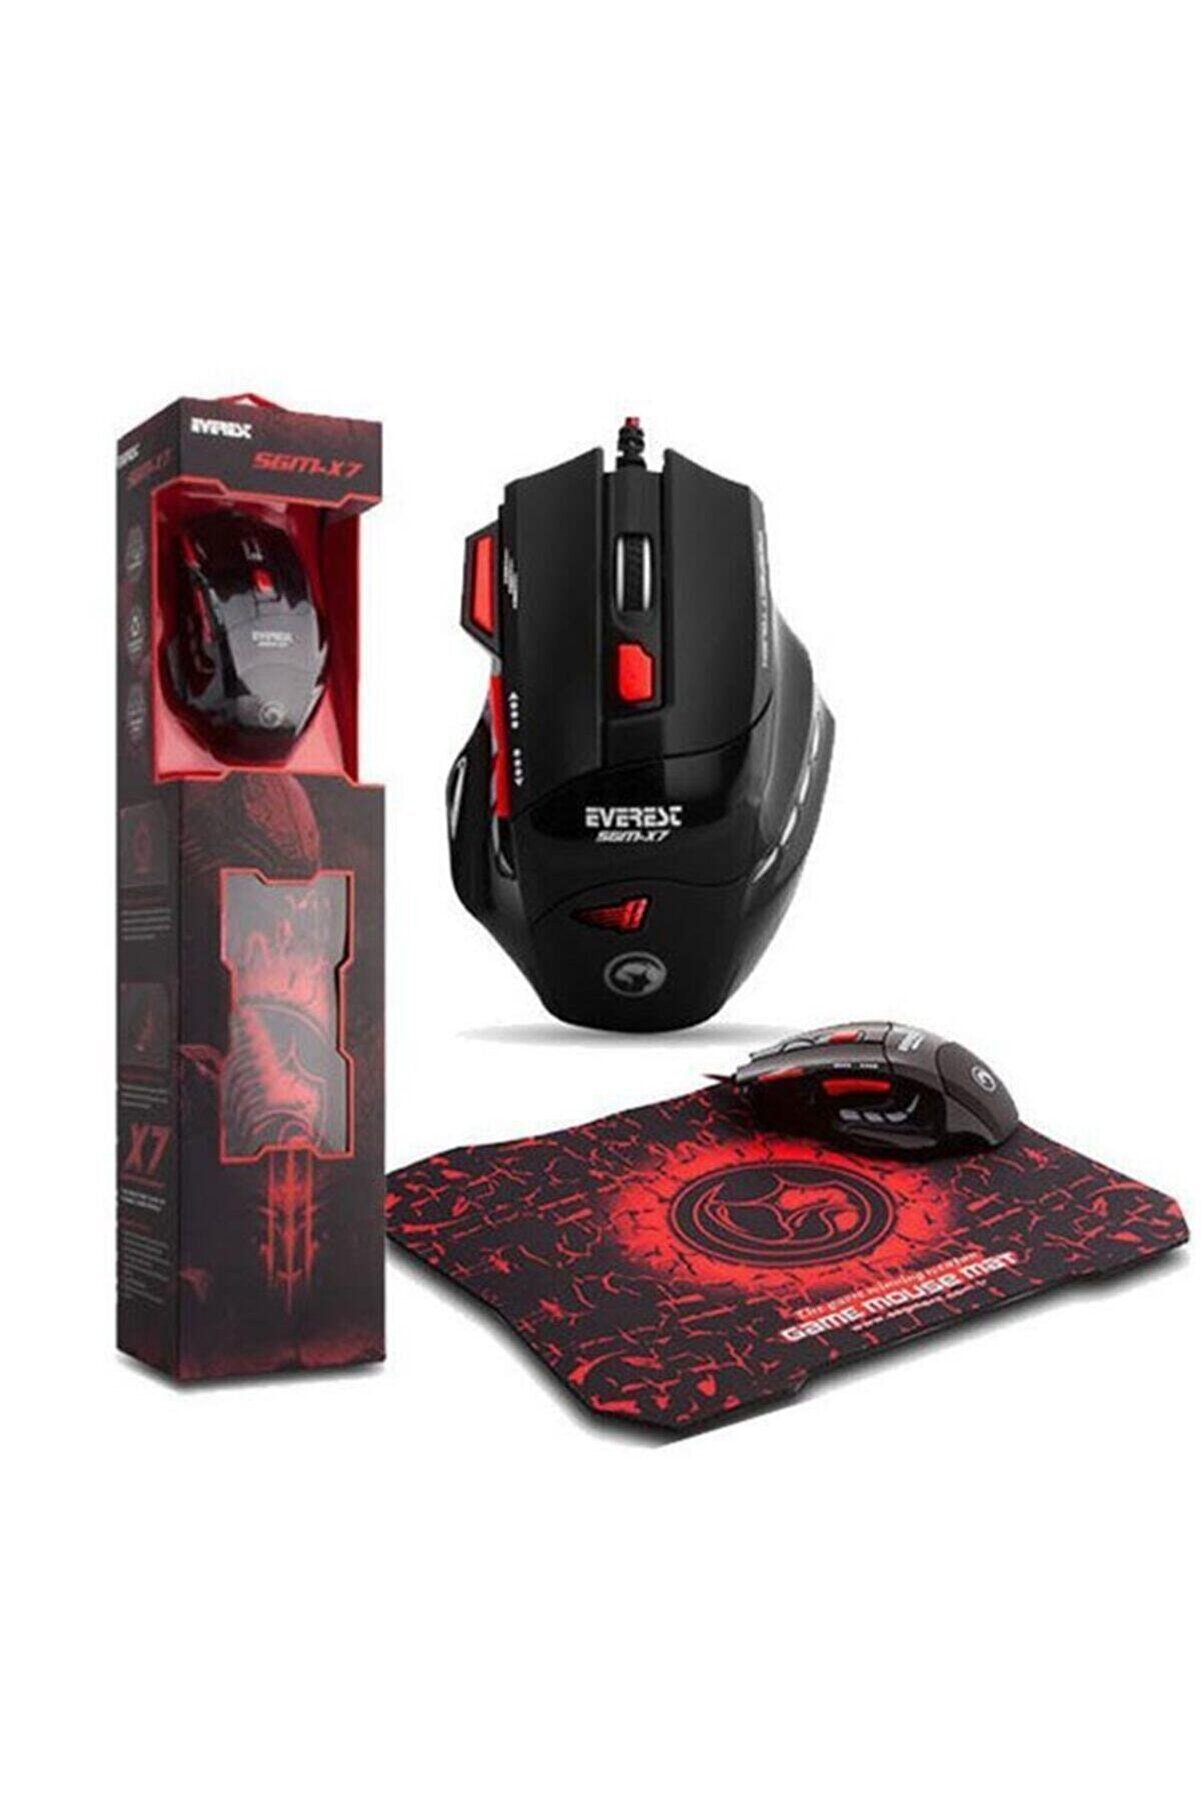 Everest Sgm-x7 Usb Siyah Gaming Mouse Pad Ve Oyuncu Mouse